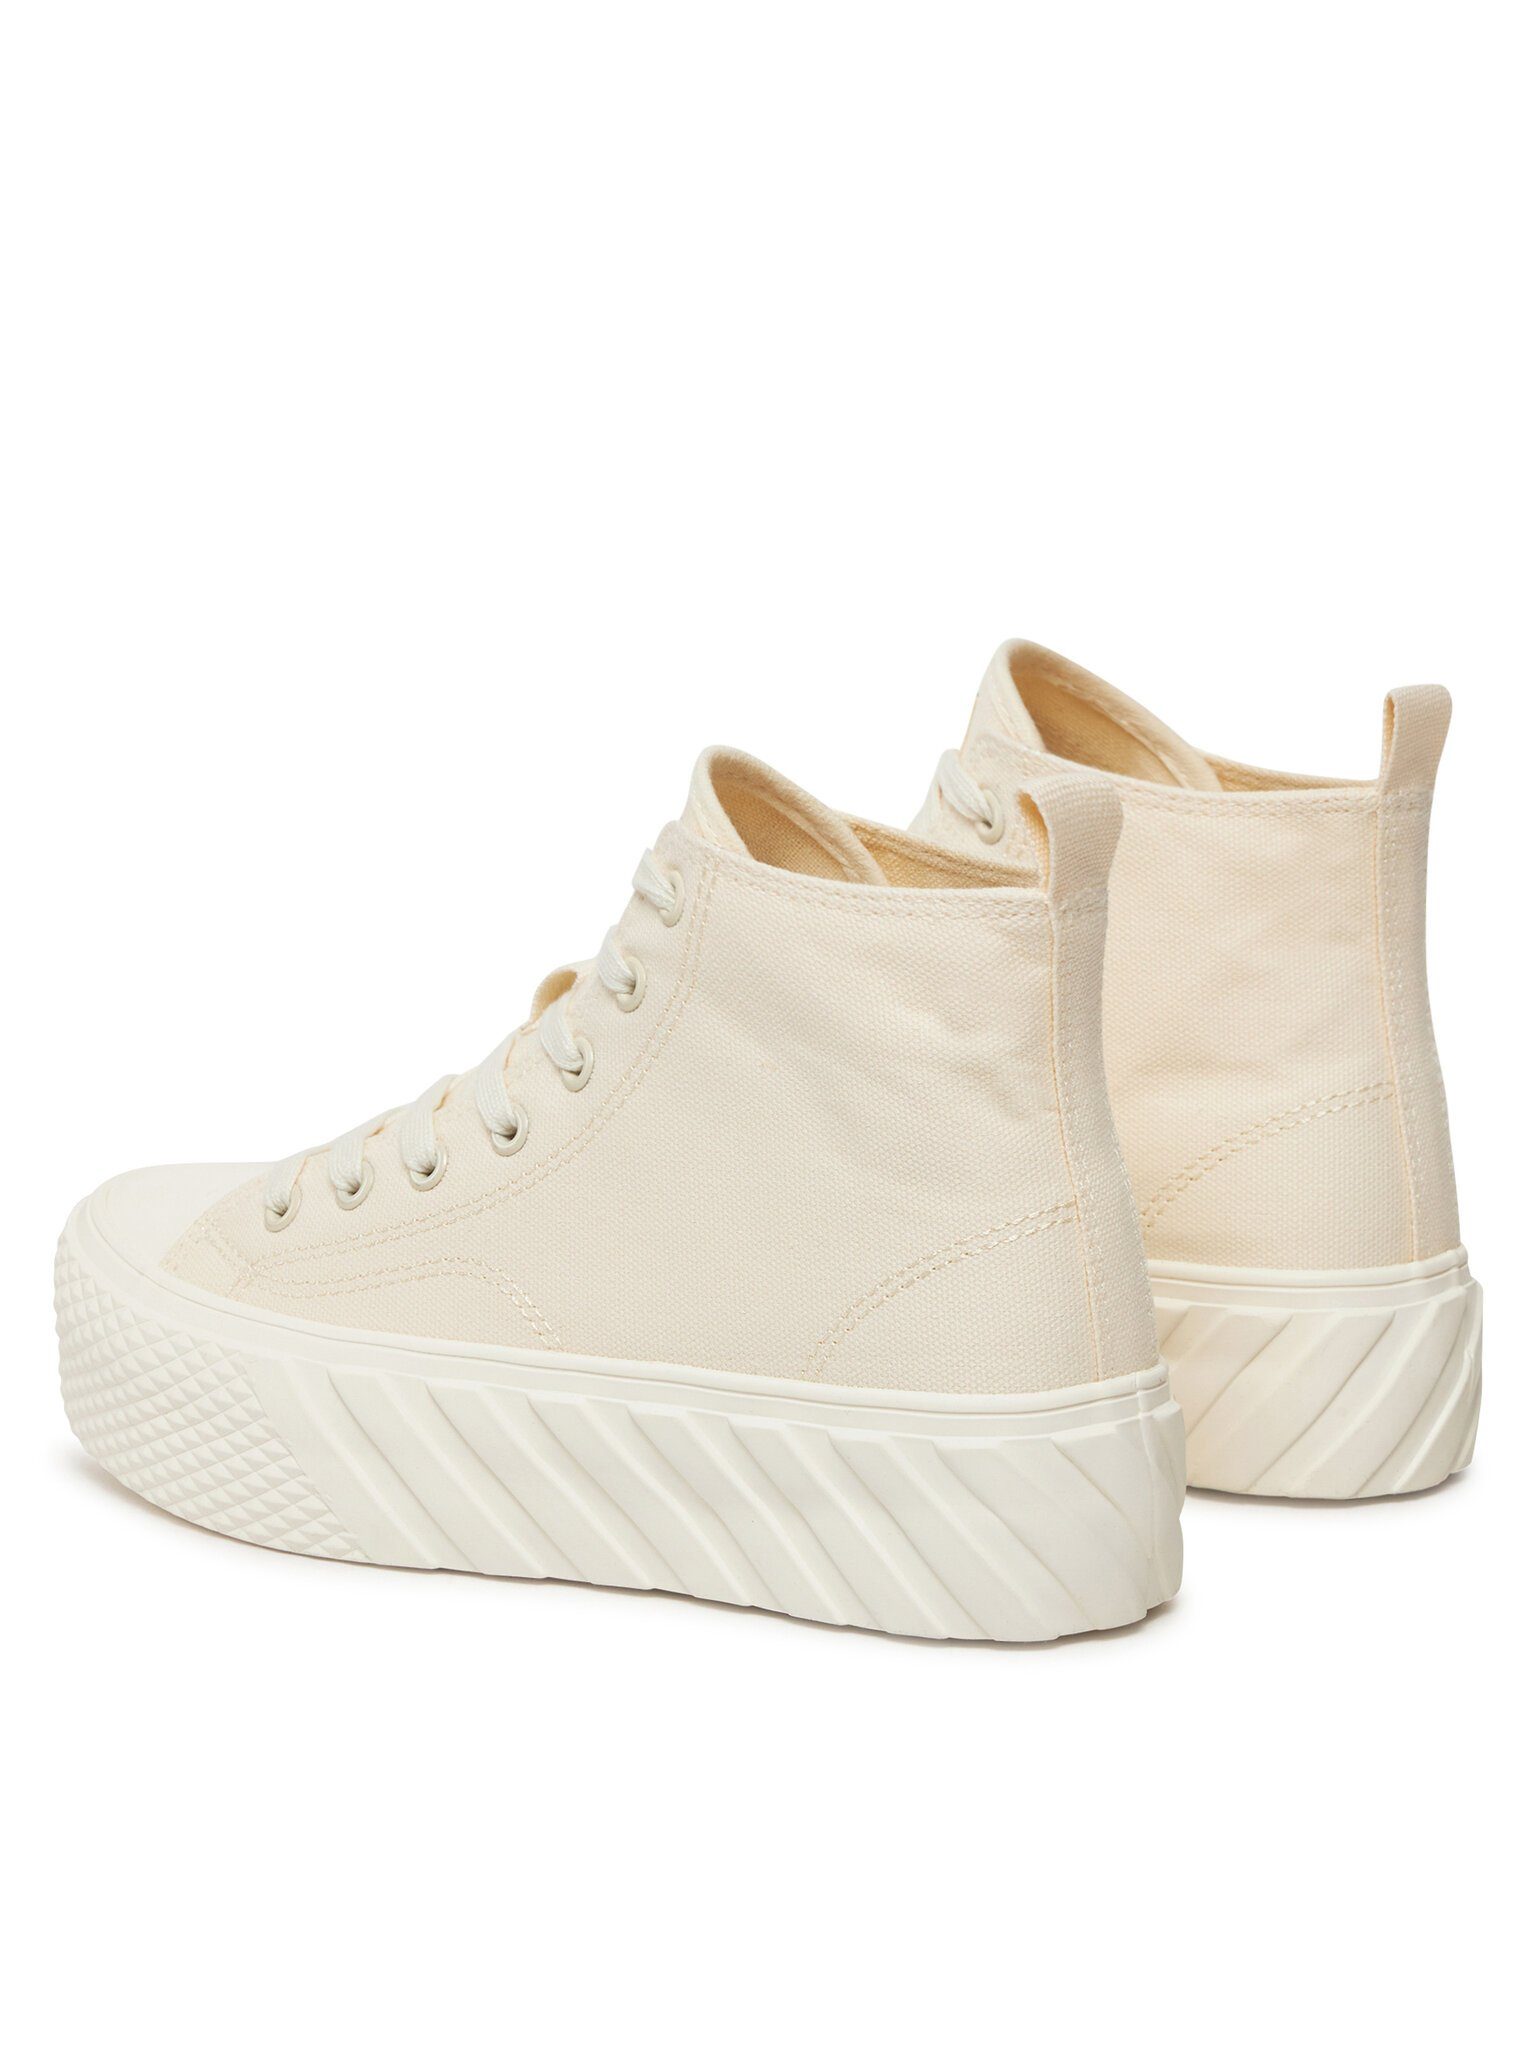 ONLY Shoes Sneakers aus Stoff Ovia 15317422 White Sneaker